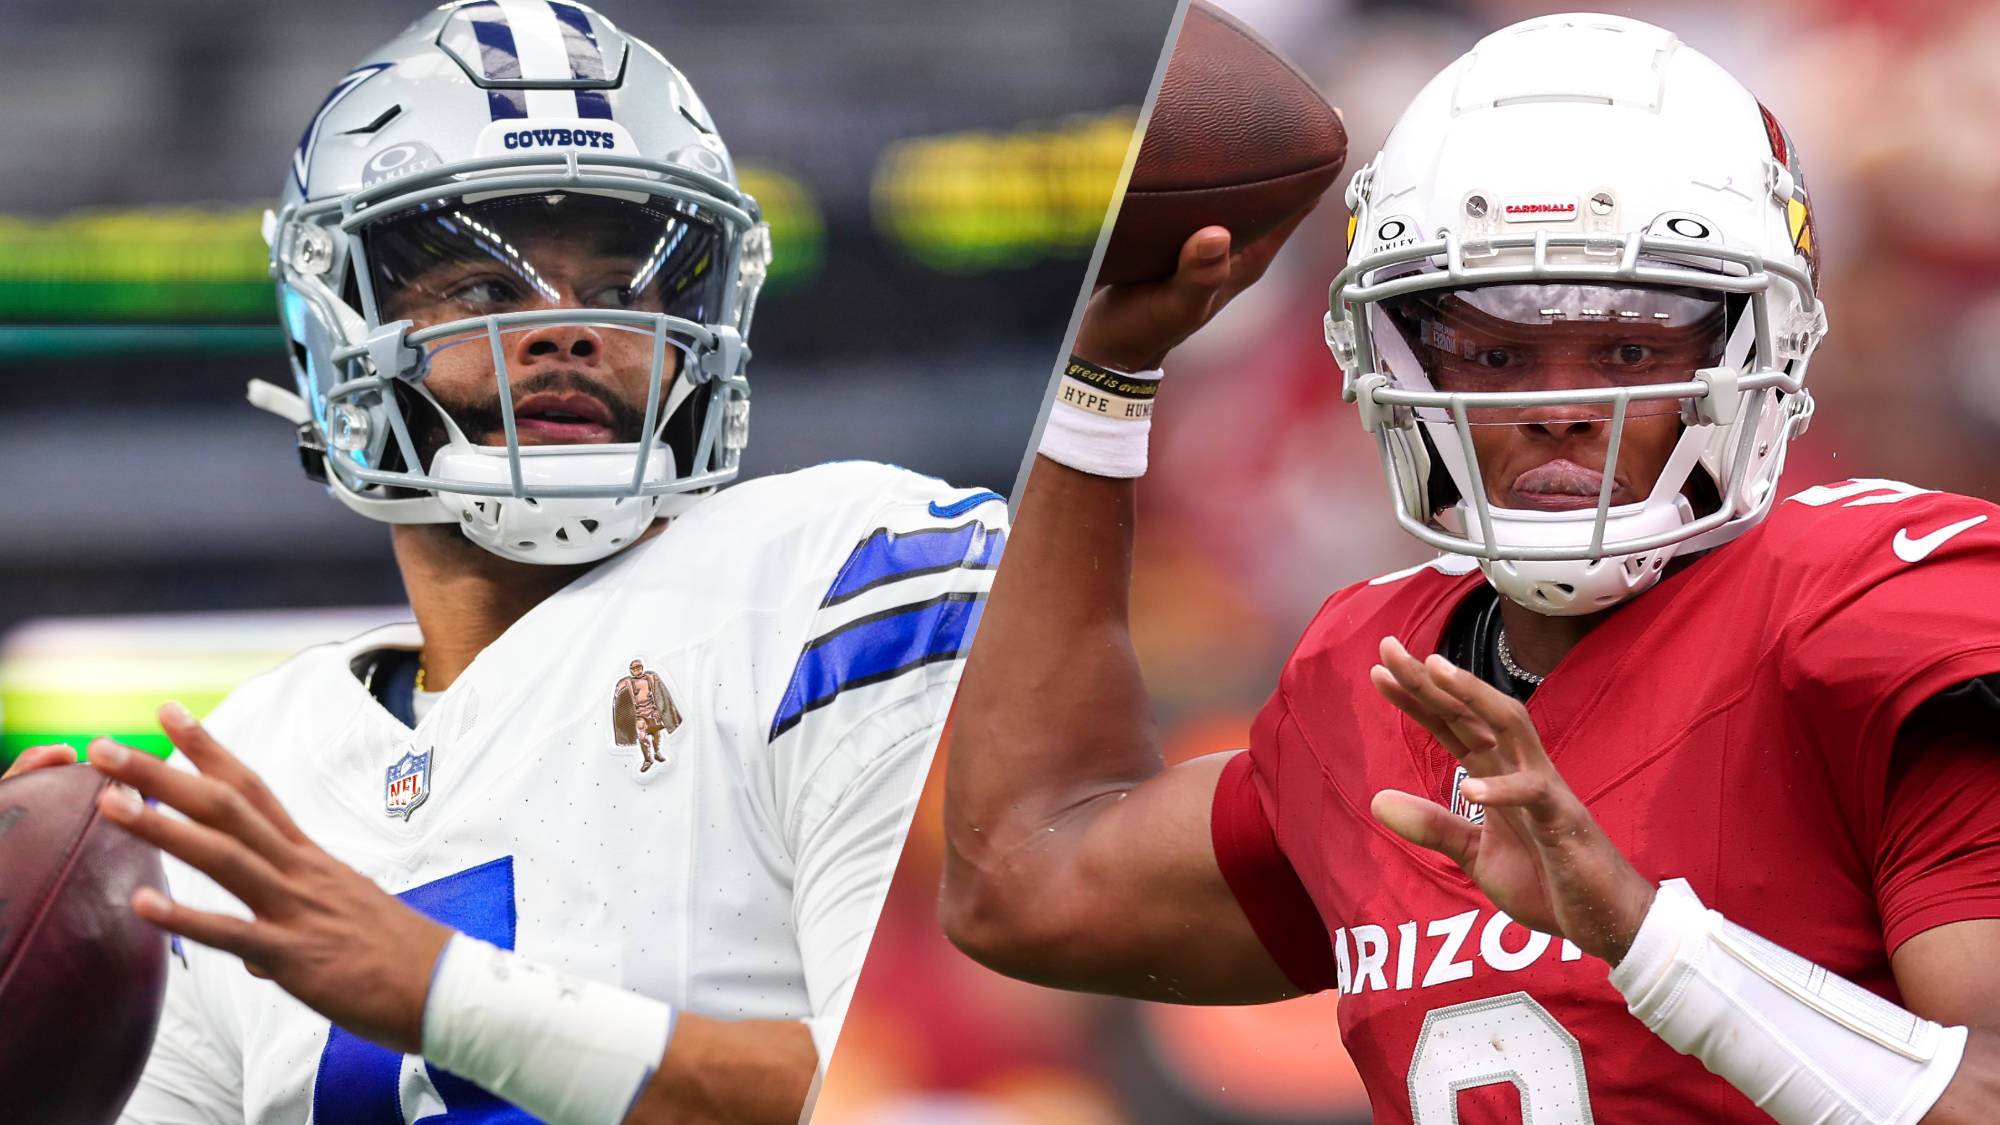 Cowboys vs. Cardinals: How to Watch the Week 3 NFL Game Online, Start Time,  Live Stream